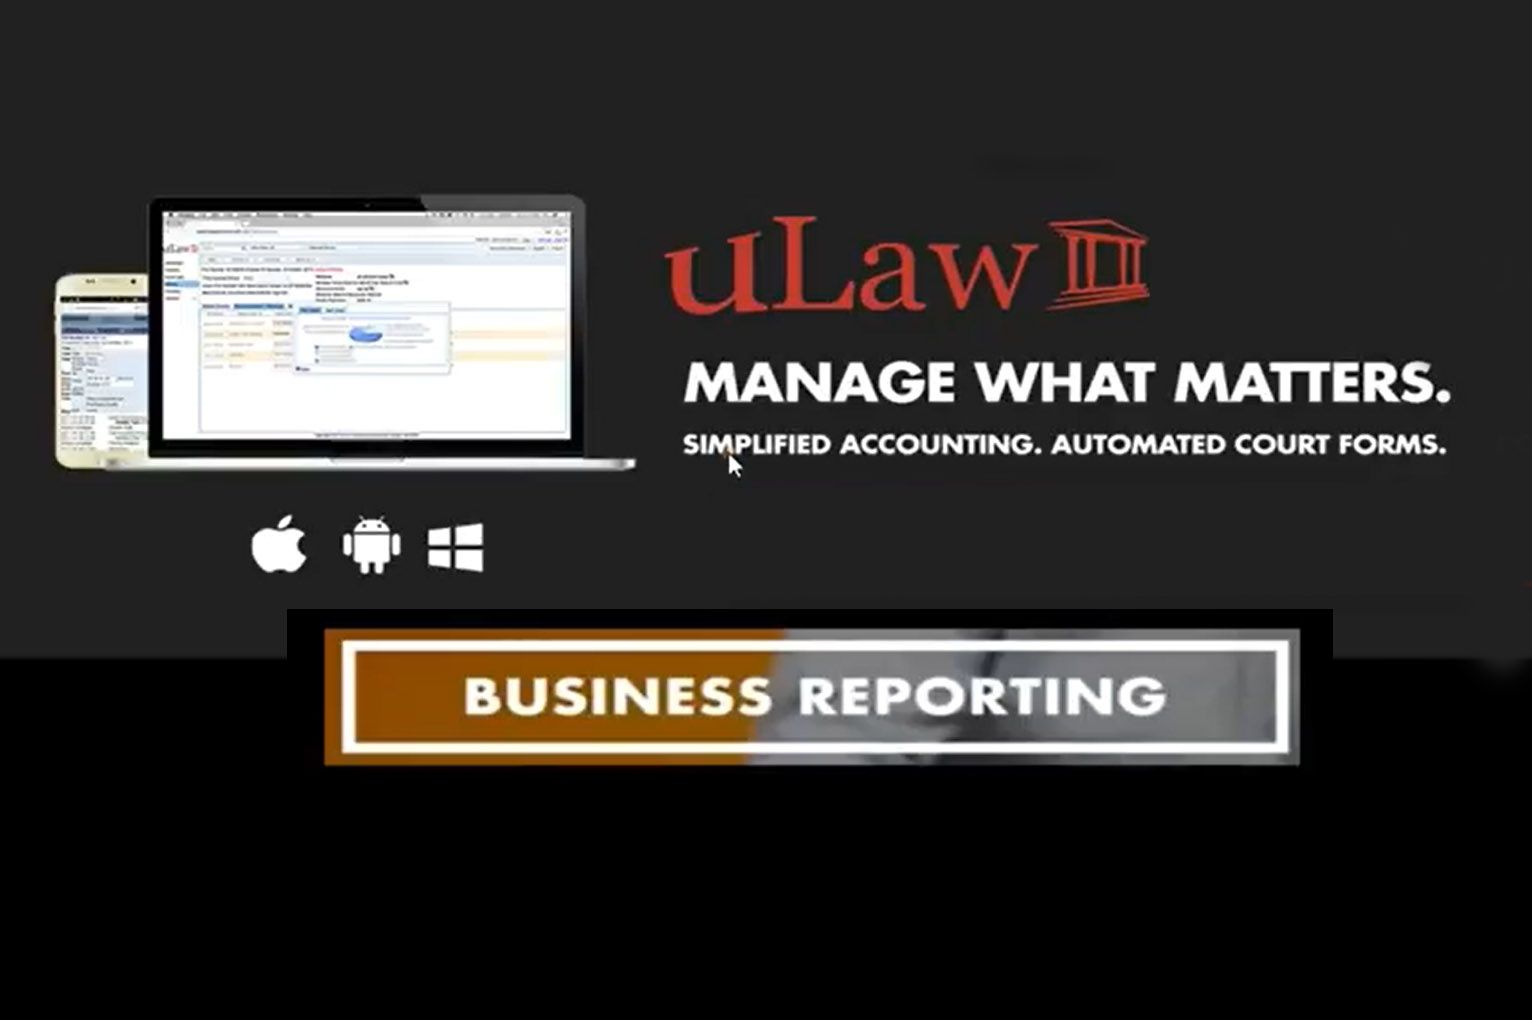 Week of April 6 webinar: 65 tasks automated with uLaw